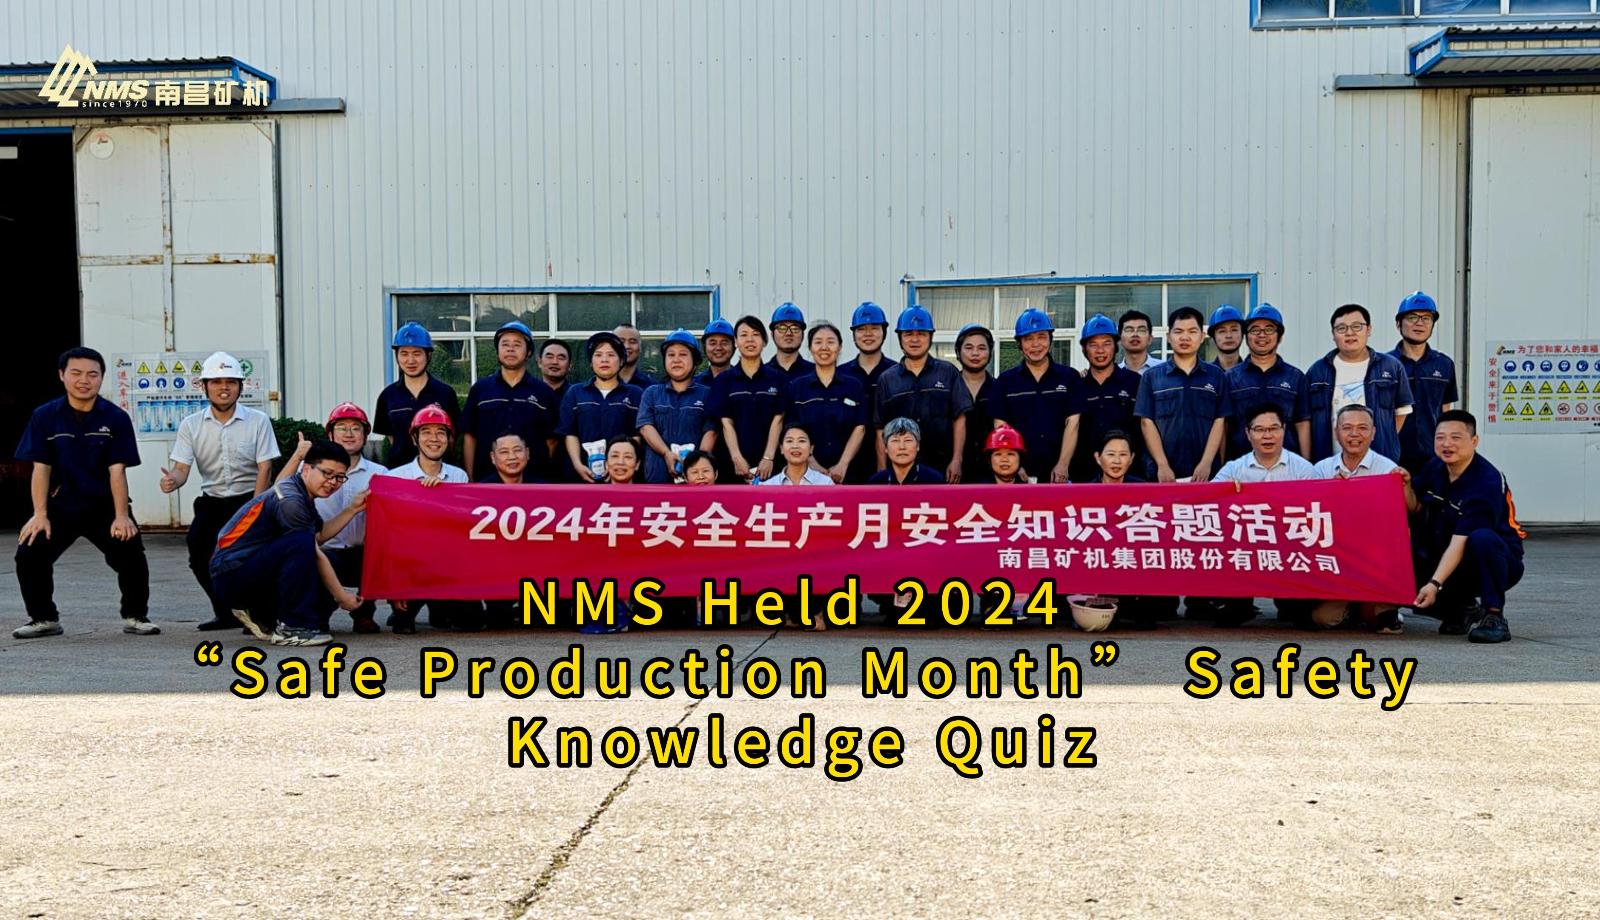 NMS Held 2024 “Safe Production Month” Safety Knowledge Quiz